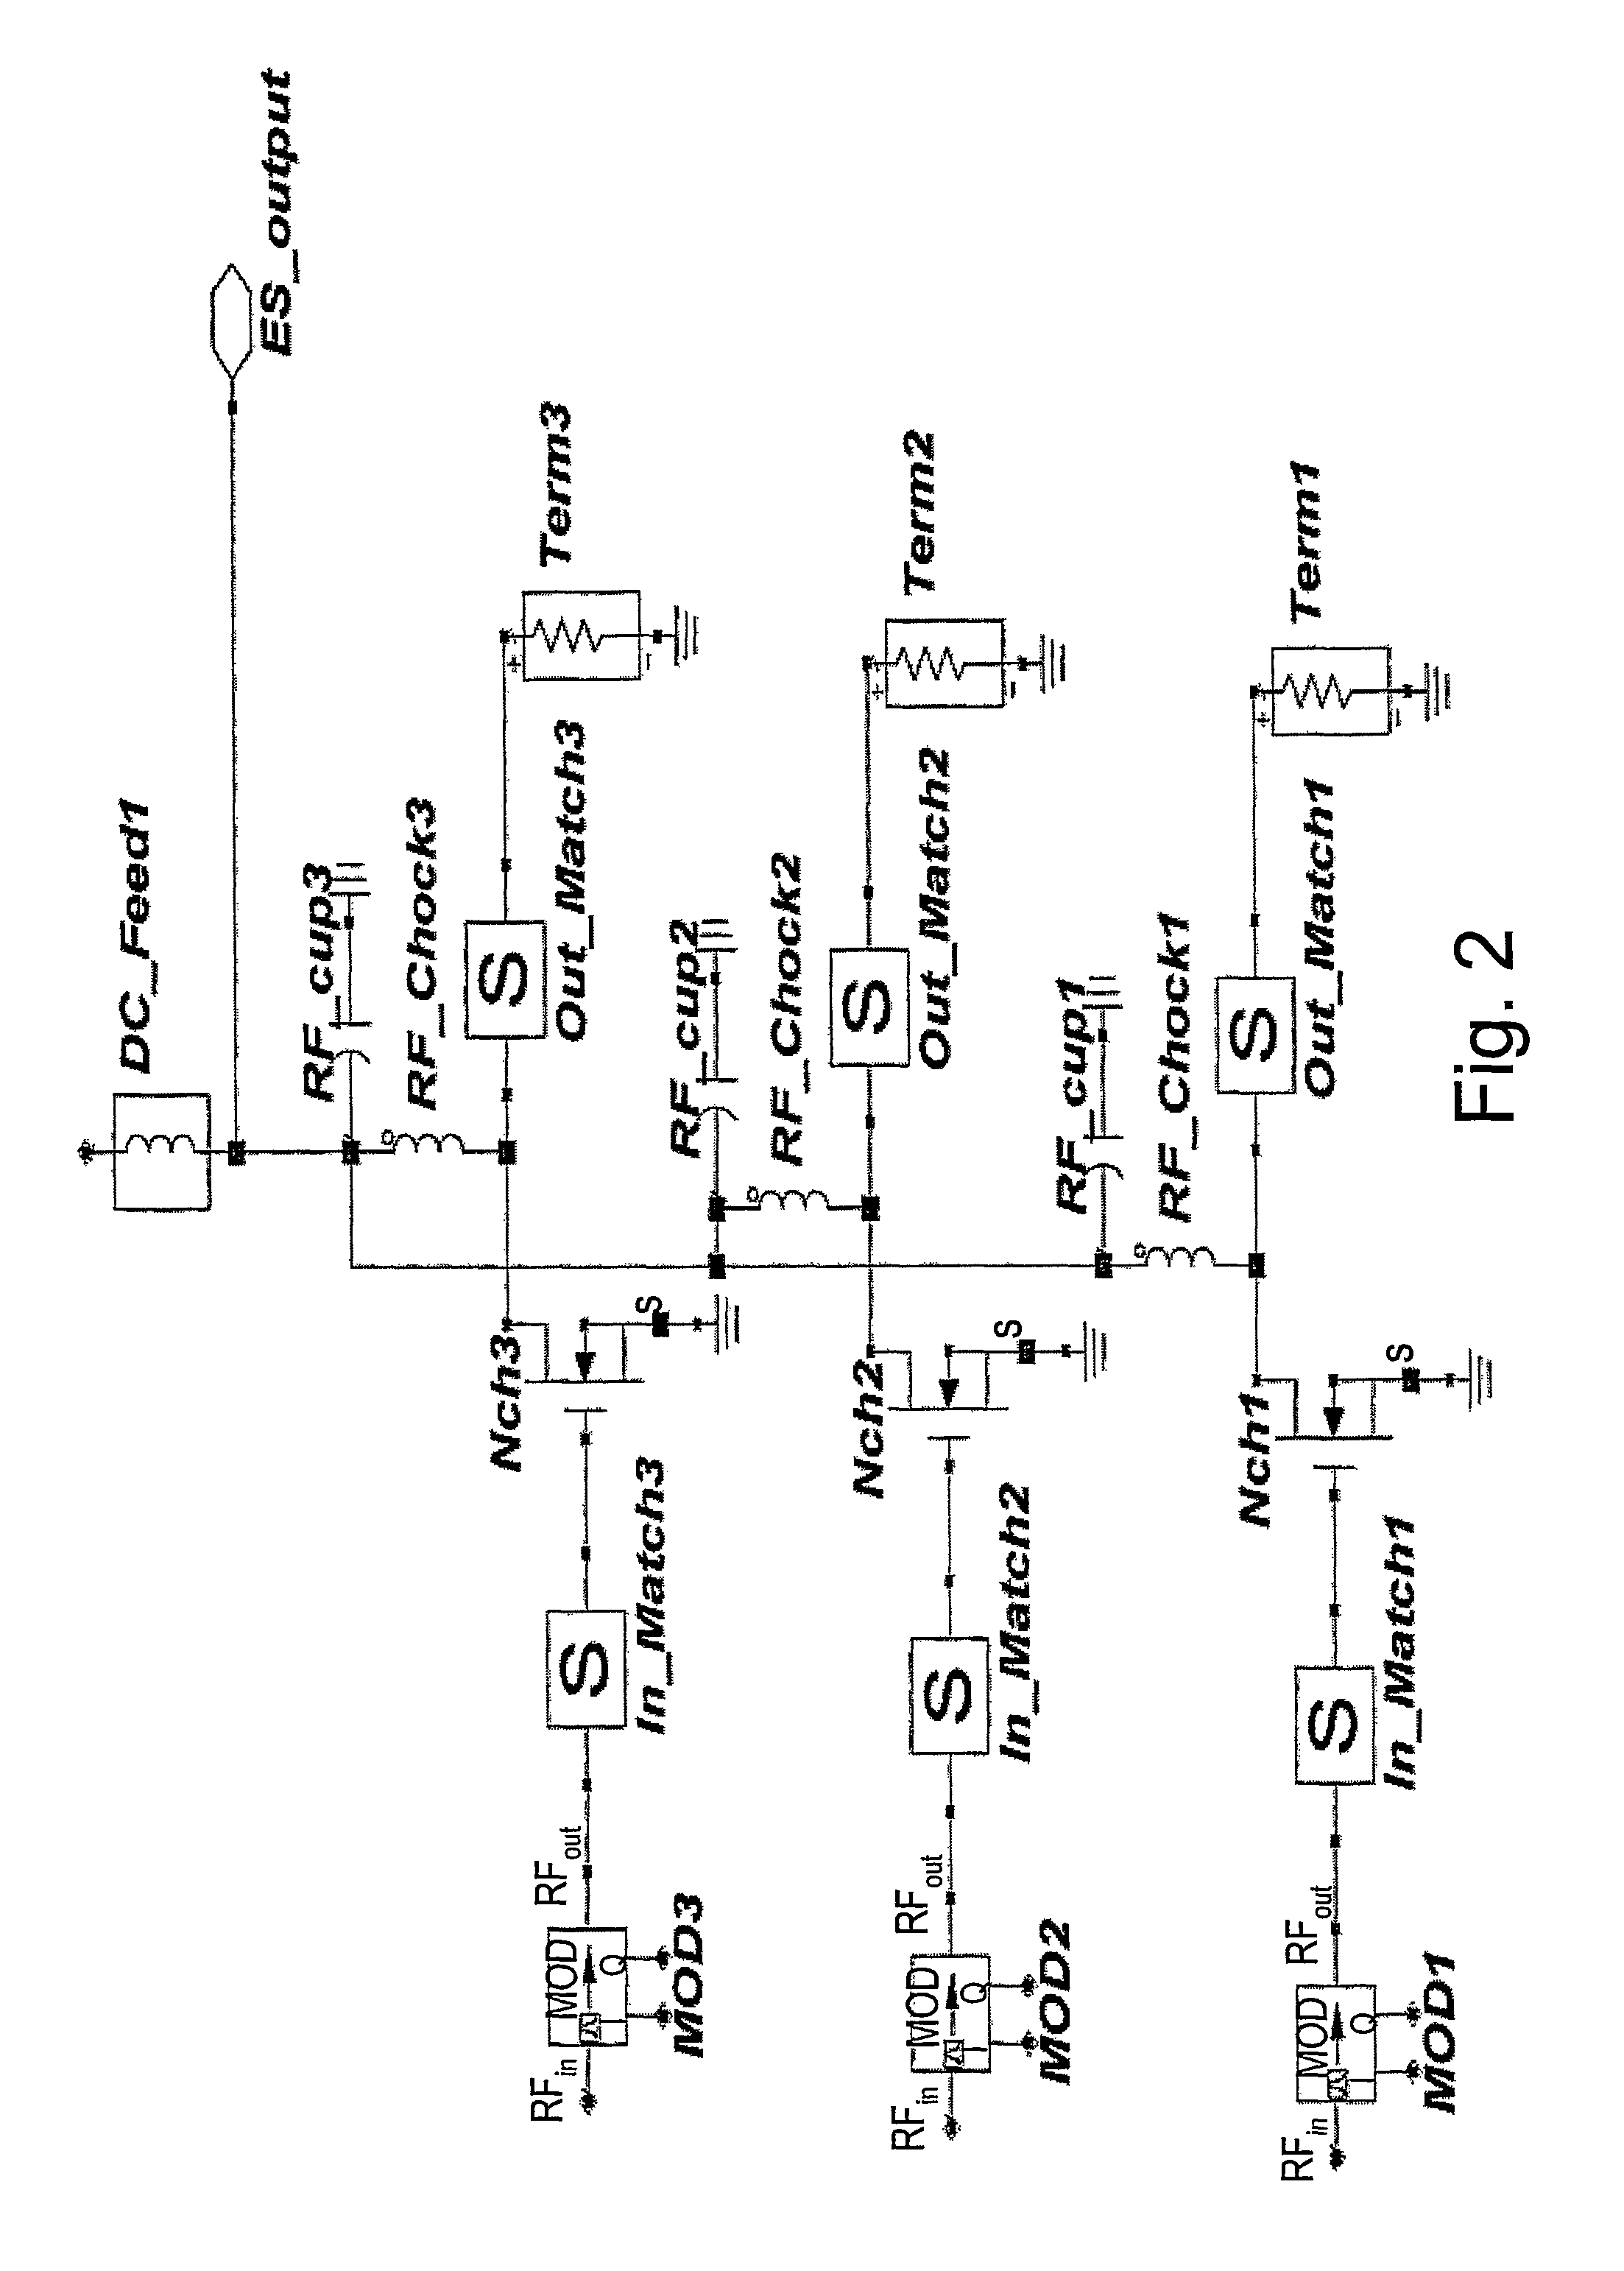 Method and apparatus for improving the performance of MIMO wireless systems